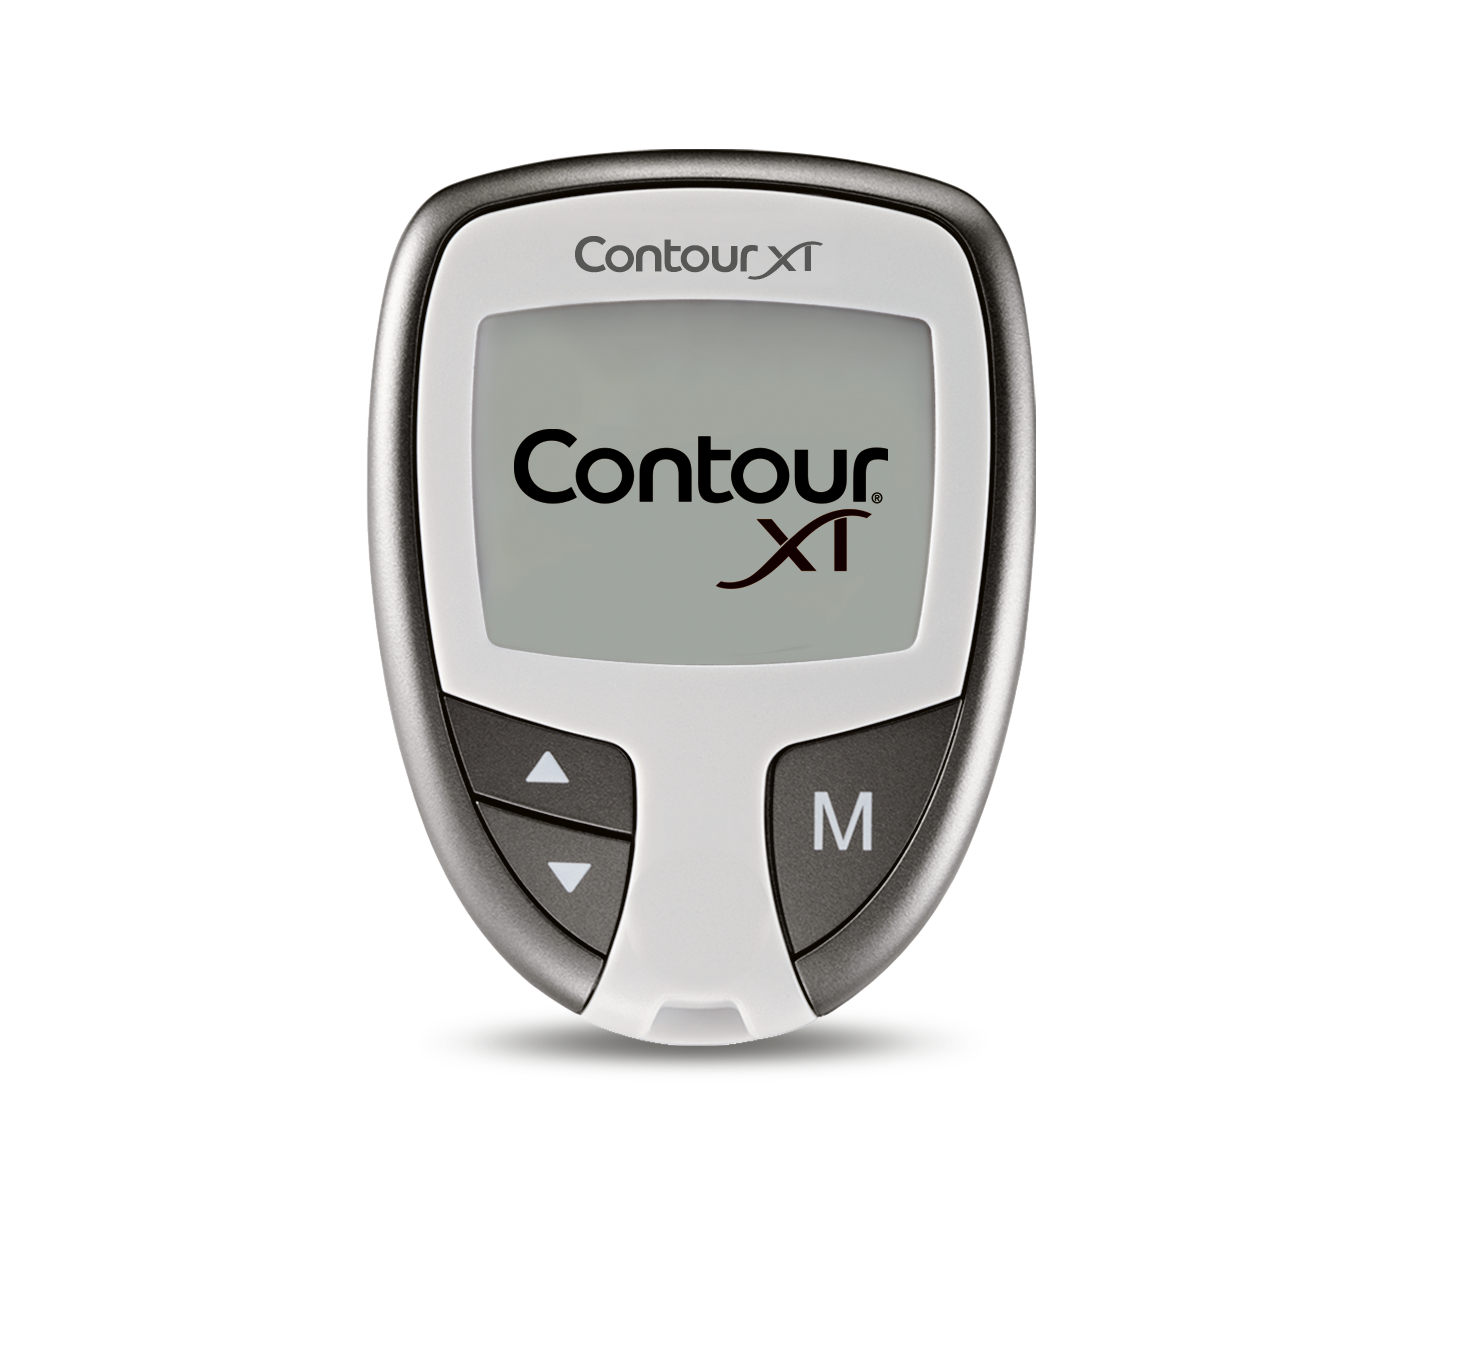 Contour XT meter with no result